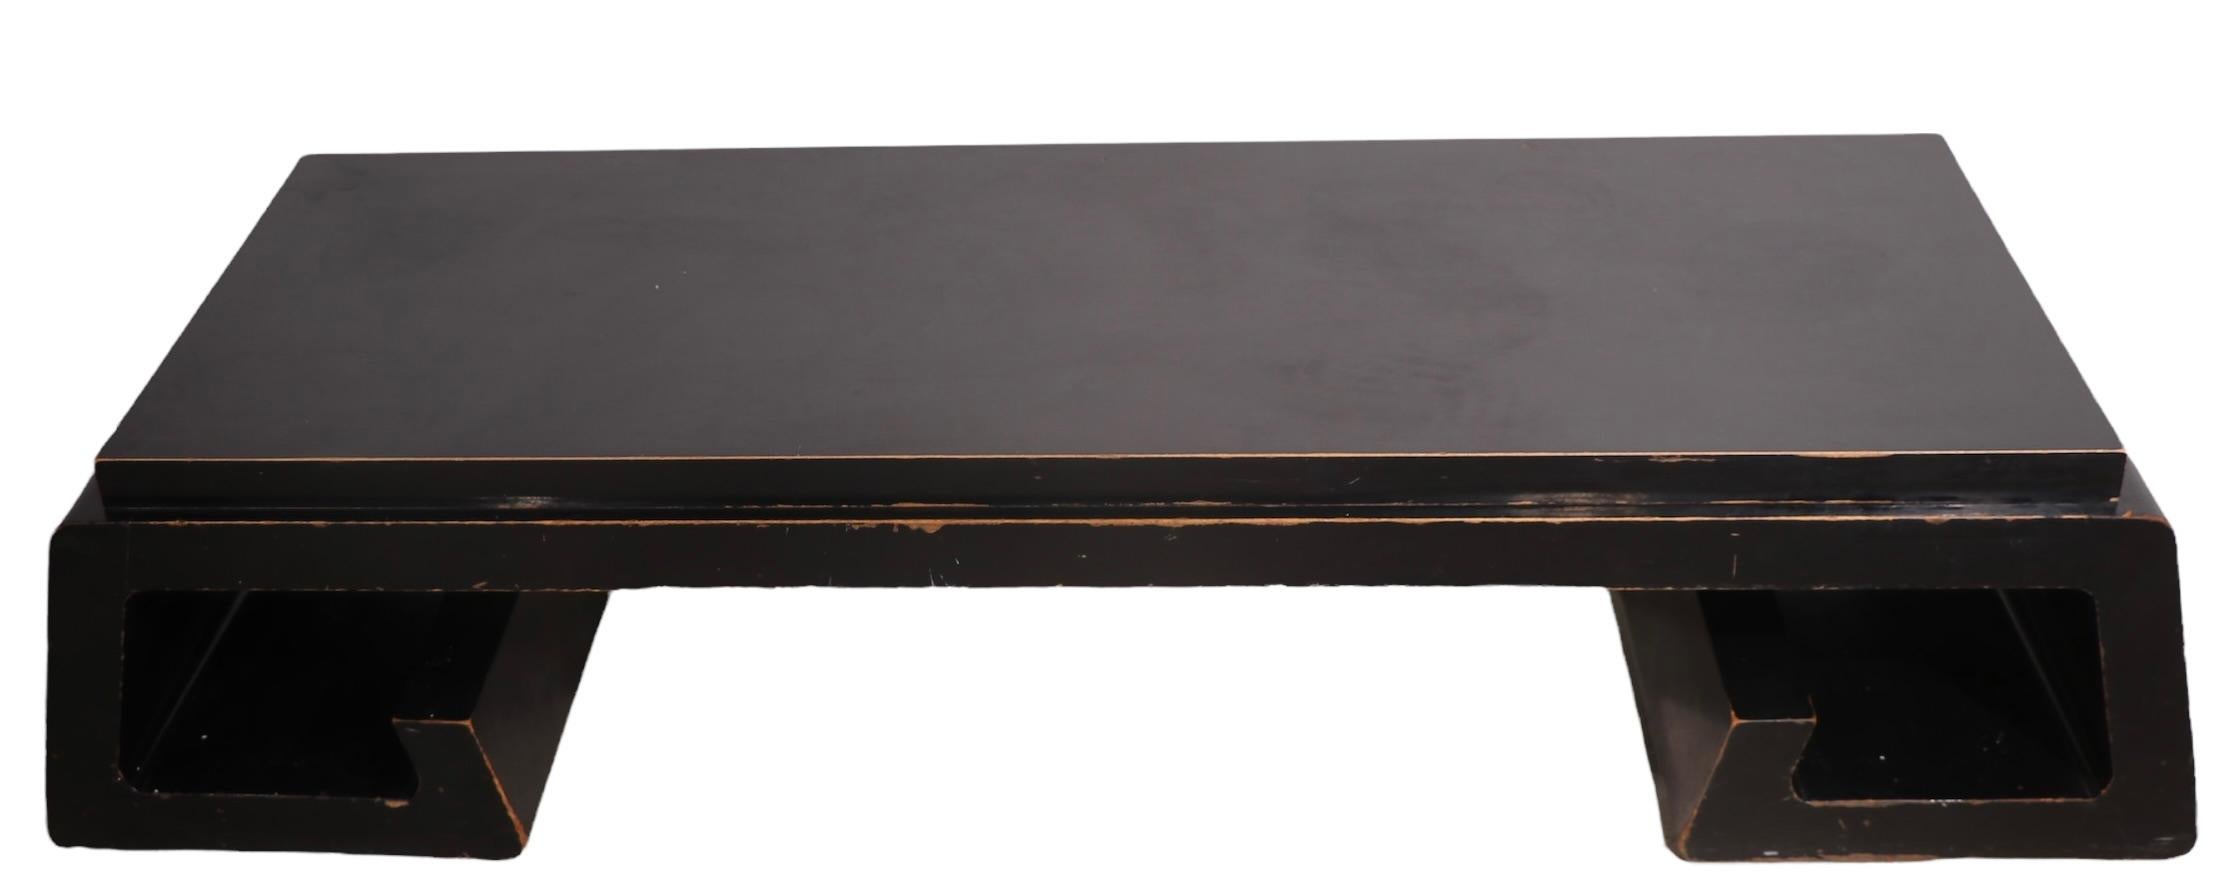 Lacquered Art Deco Coffee Table by James Mont in Original Estate Condition For Sale